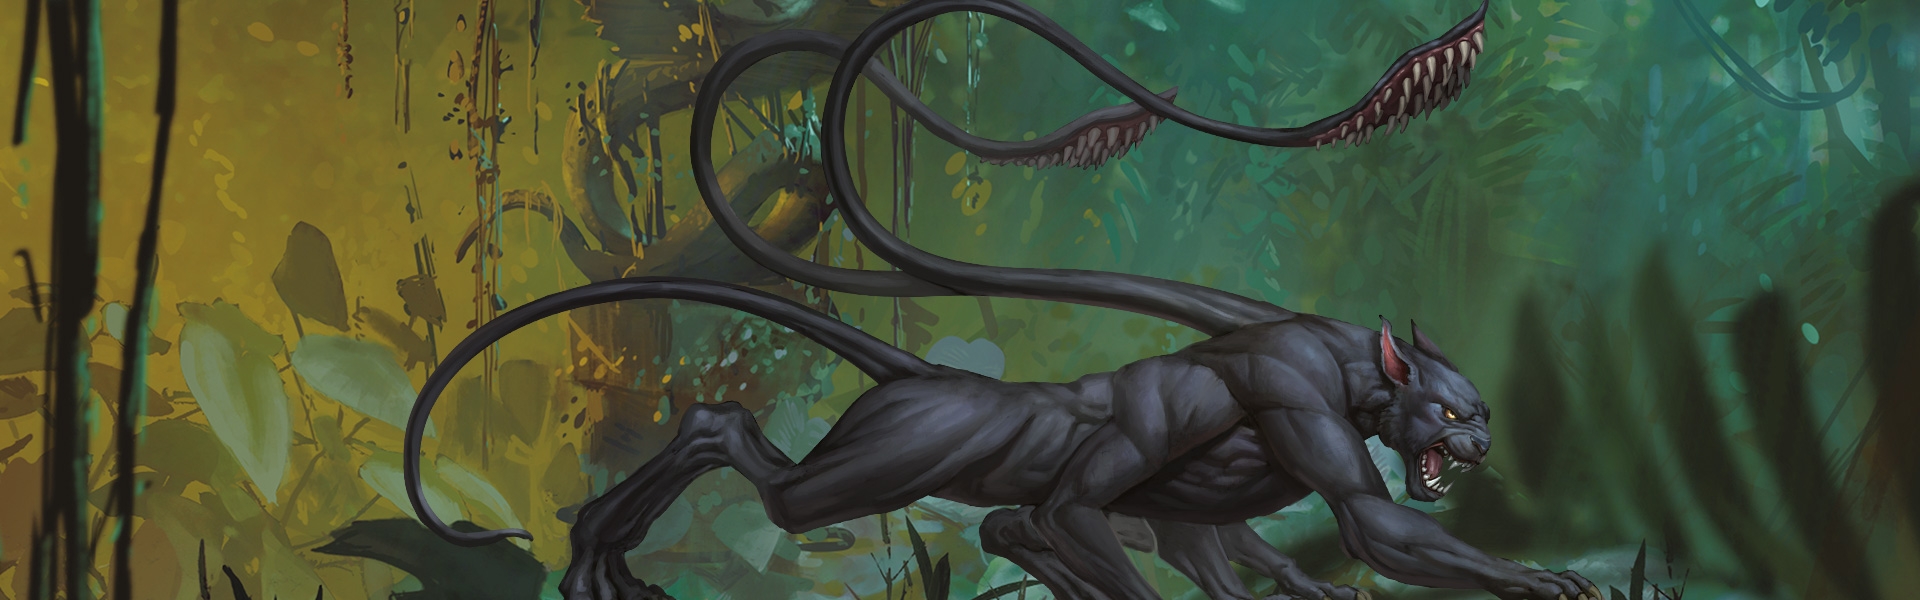 A displacer beast approches...